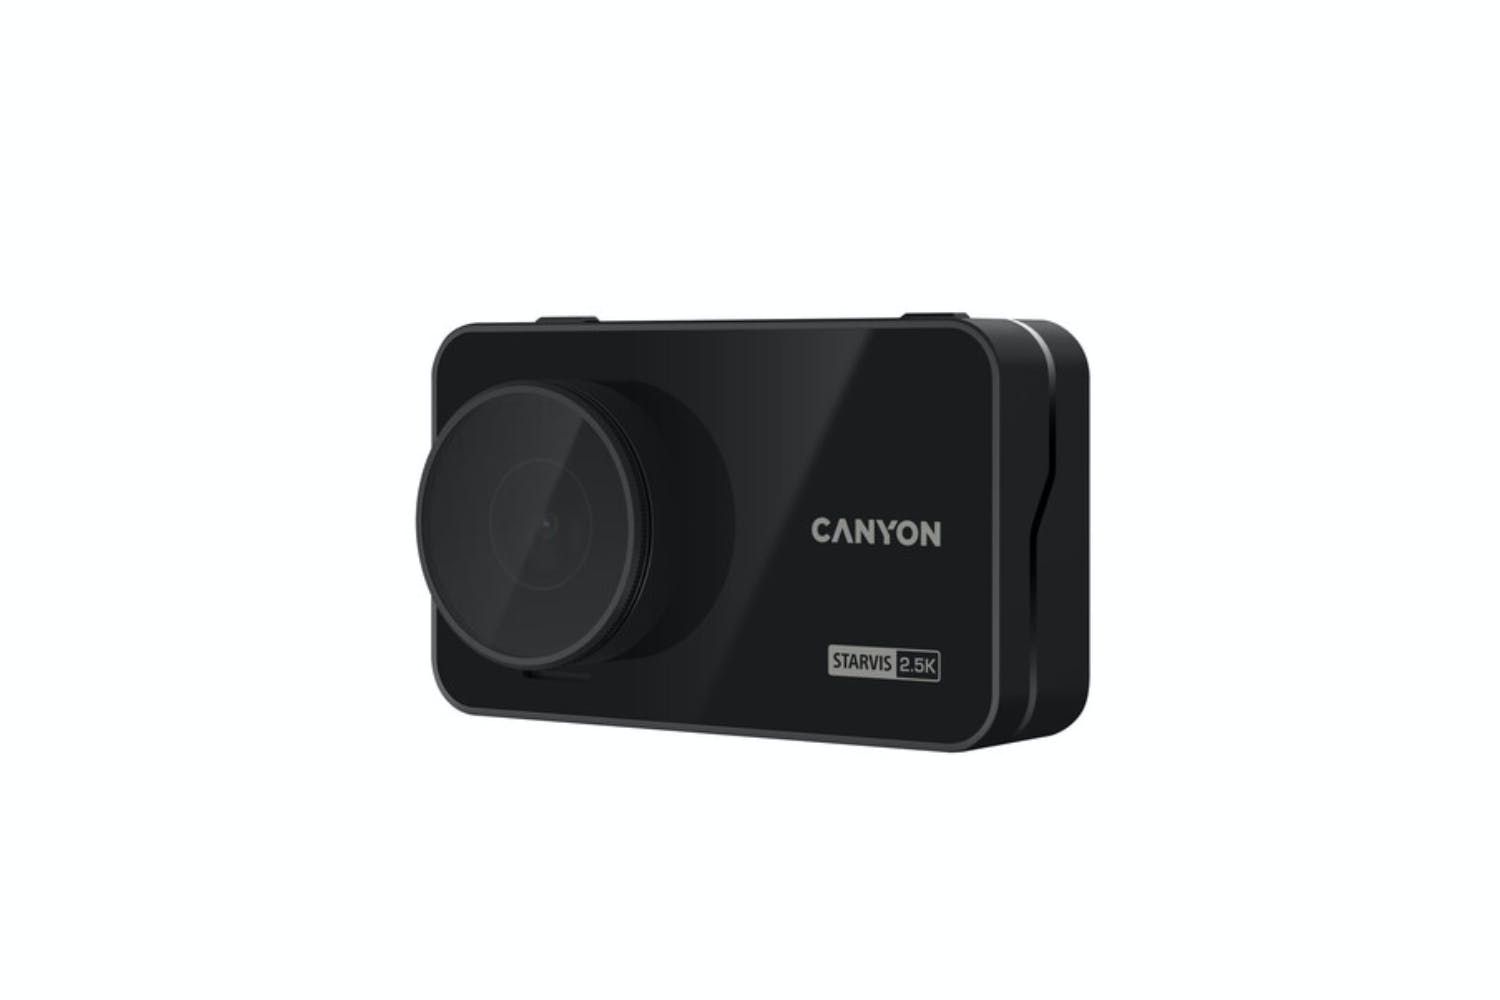 Canyon RoadRunner CDVR-25GPS, 3.0'' IPS (640x360), touch screen, WQHD 2.5K 2560x1440@60fps, NTK96670, 5 MP CMOS Sony Starvis IMX335 image sensor, 5 MP camera, 140° Viewing Angle, Wi-Fi, GPS, Video camera database, USB Type-C, Supercapacitor_1